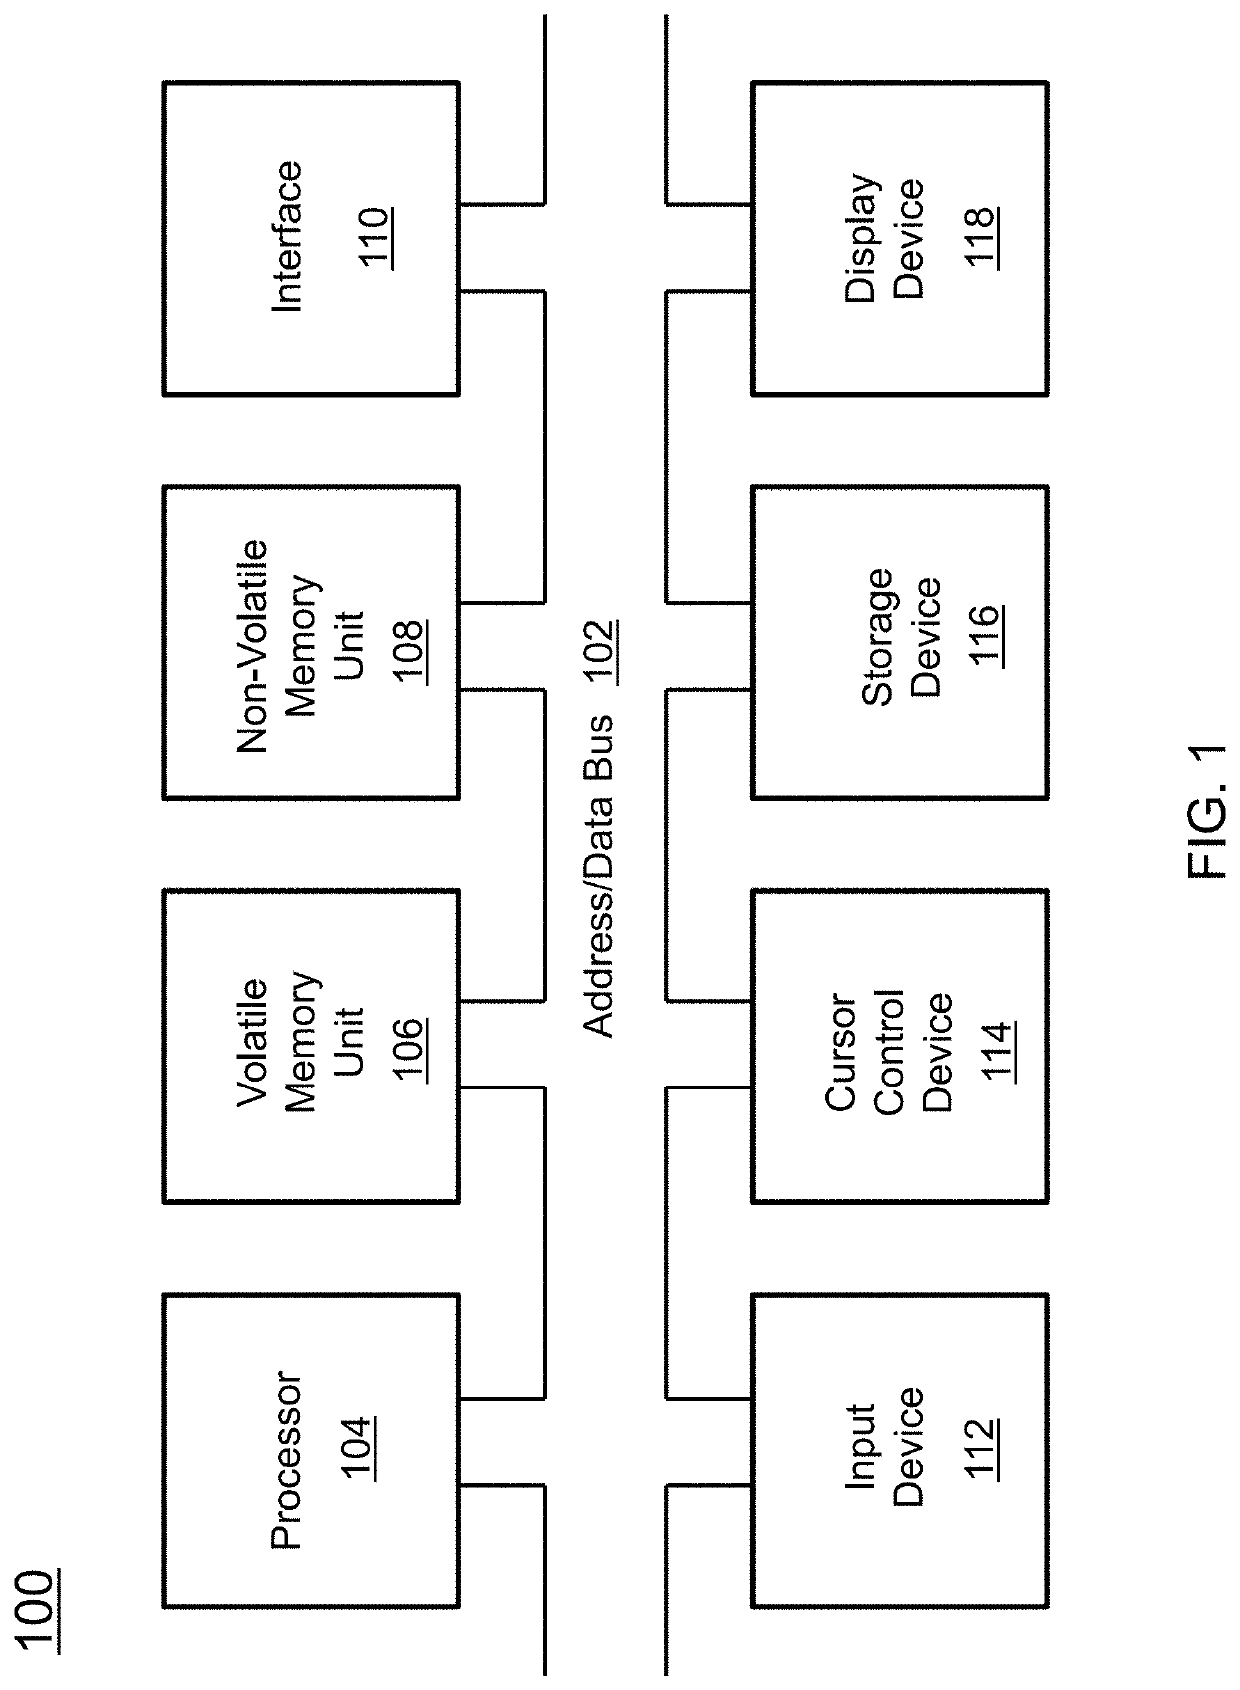 System and method for detecting backdoor attacks in convolutional neural networks